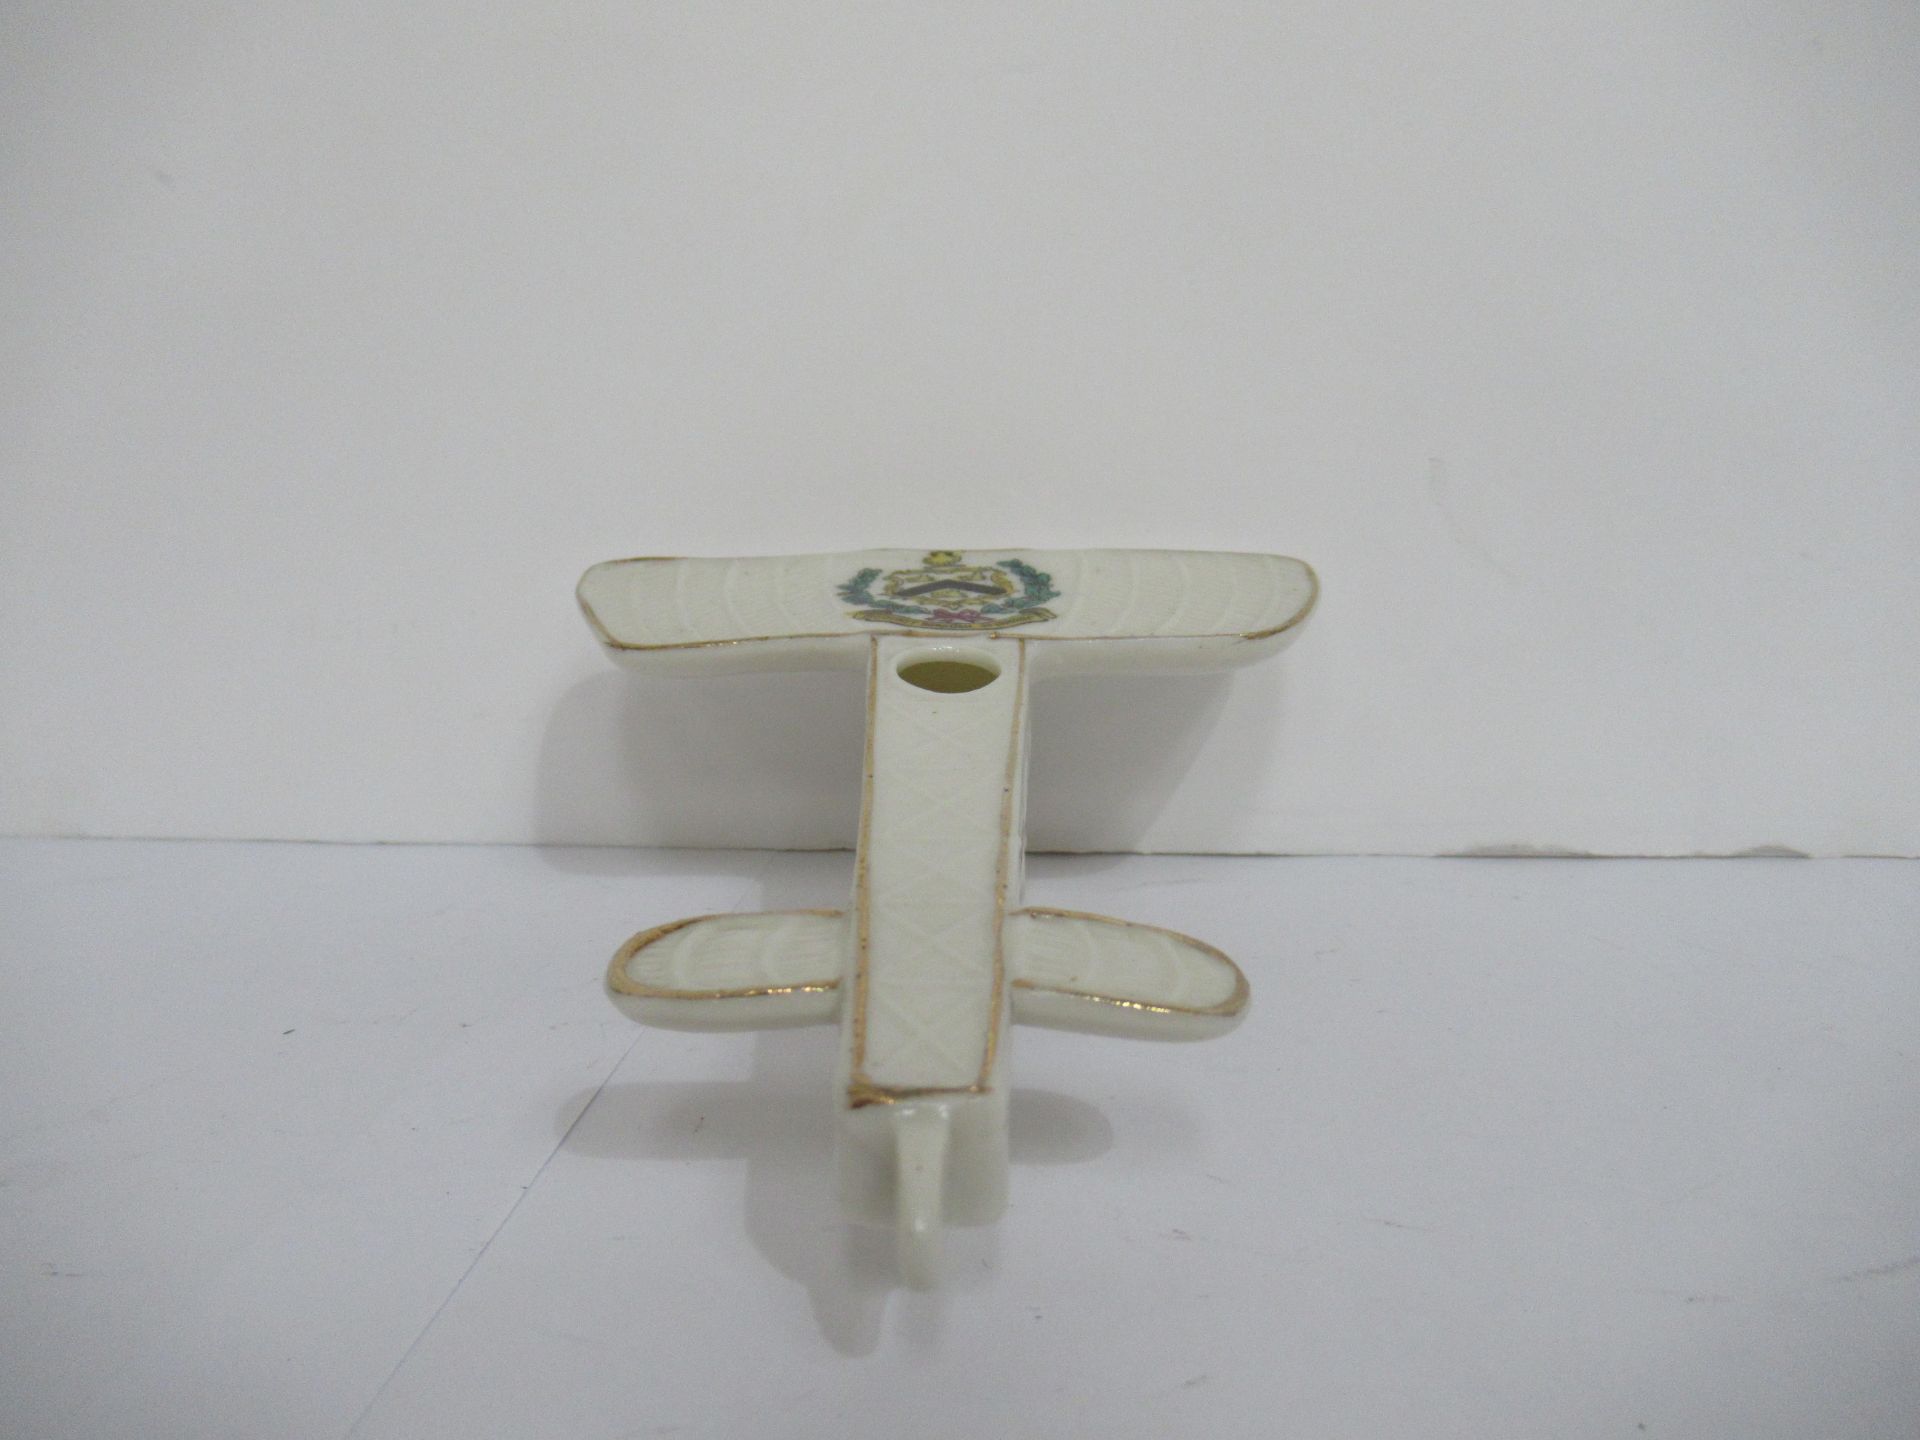 Crested china Clifton model of aeroplane with Grimsby coat of arms - Image 4 of 9